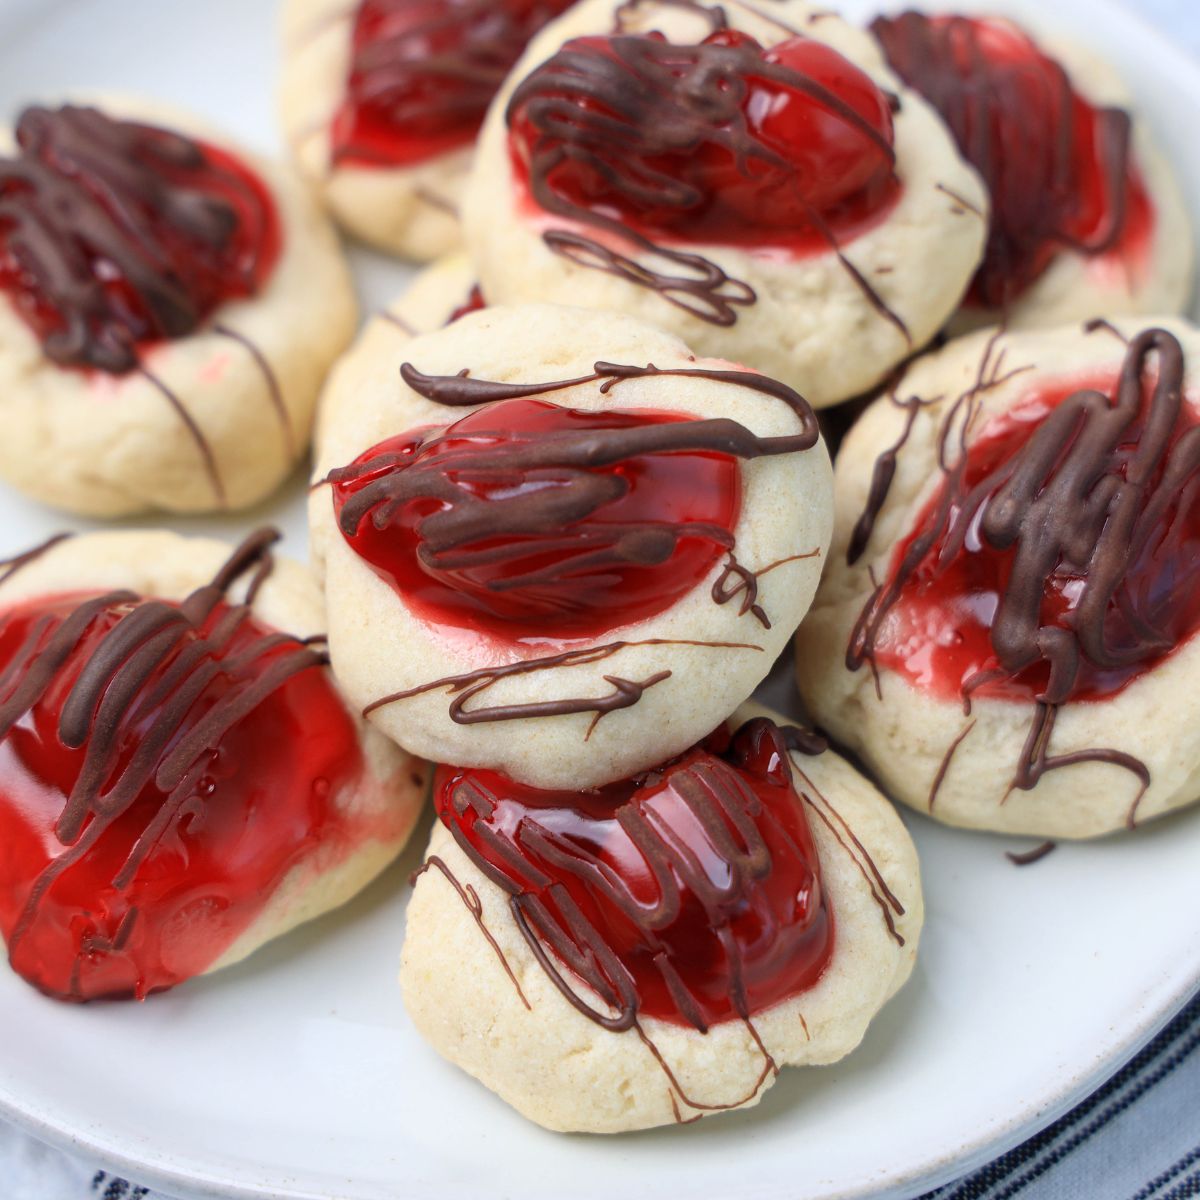 A plate of cookies covered in chocolate and cherry sauce.